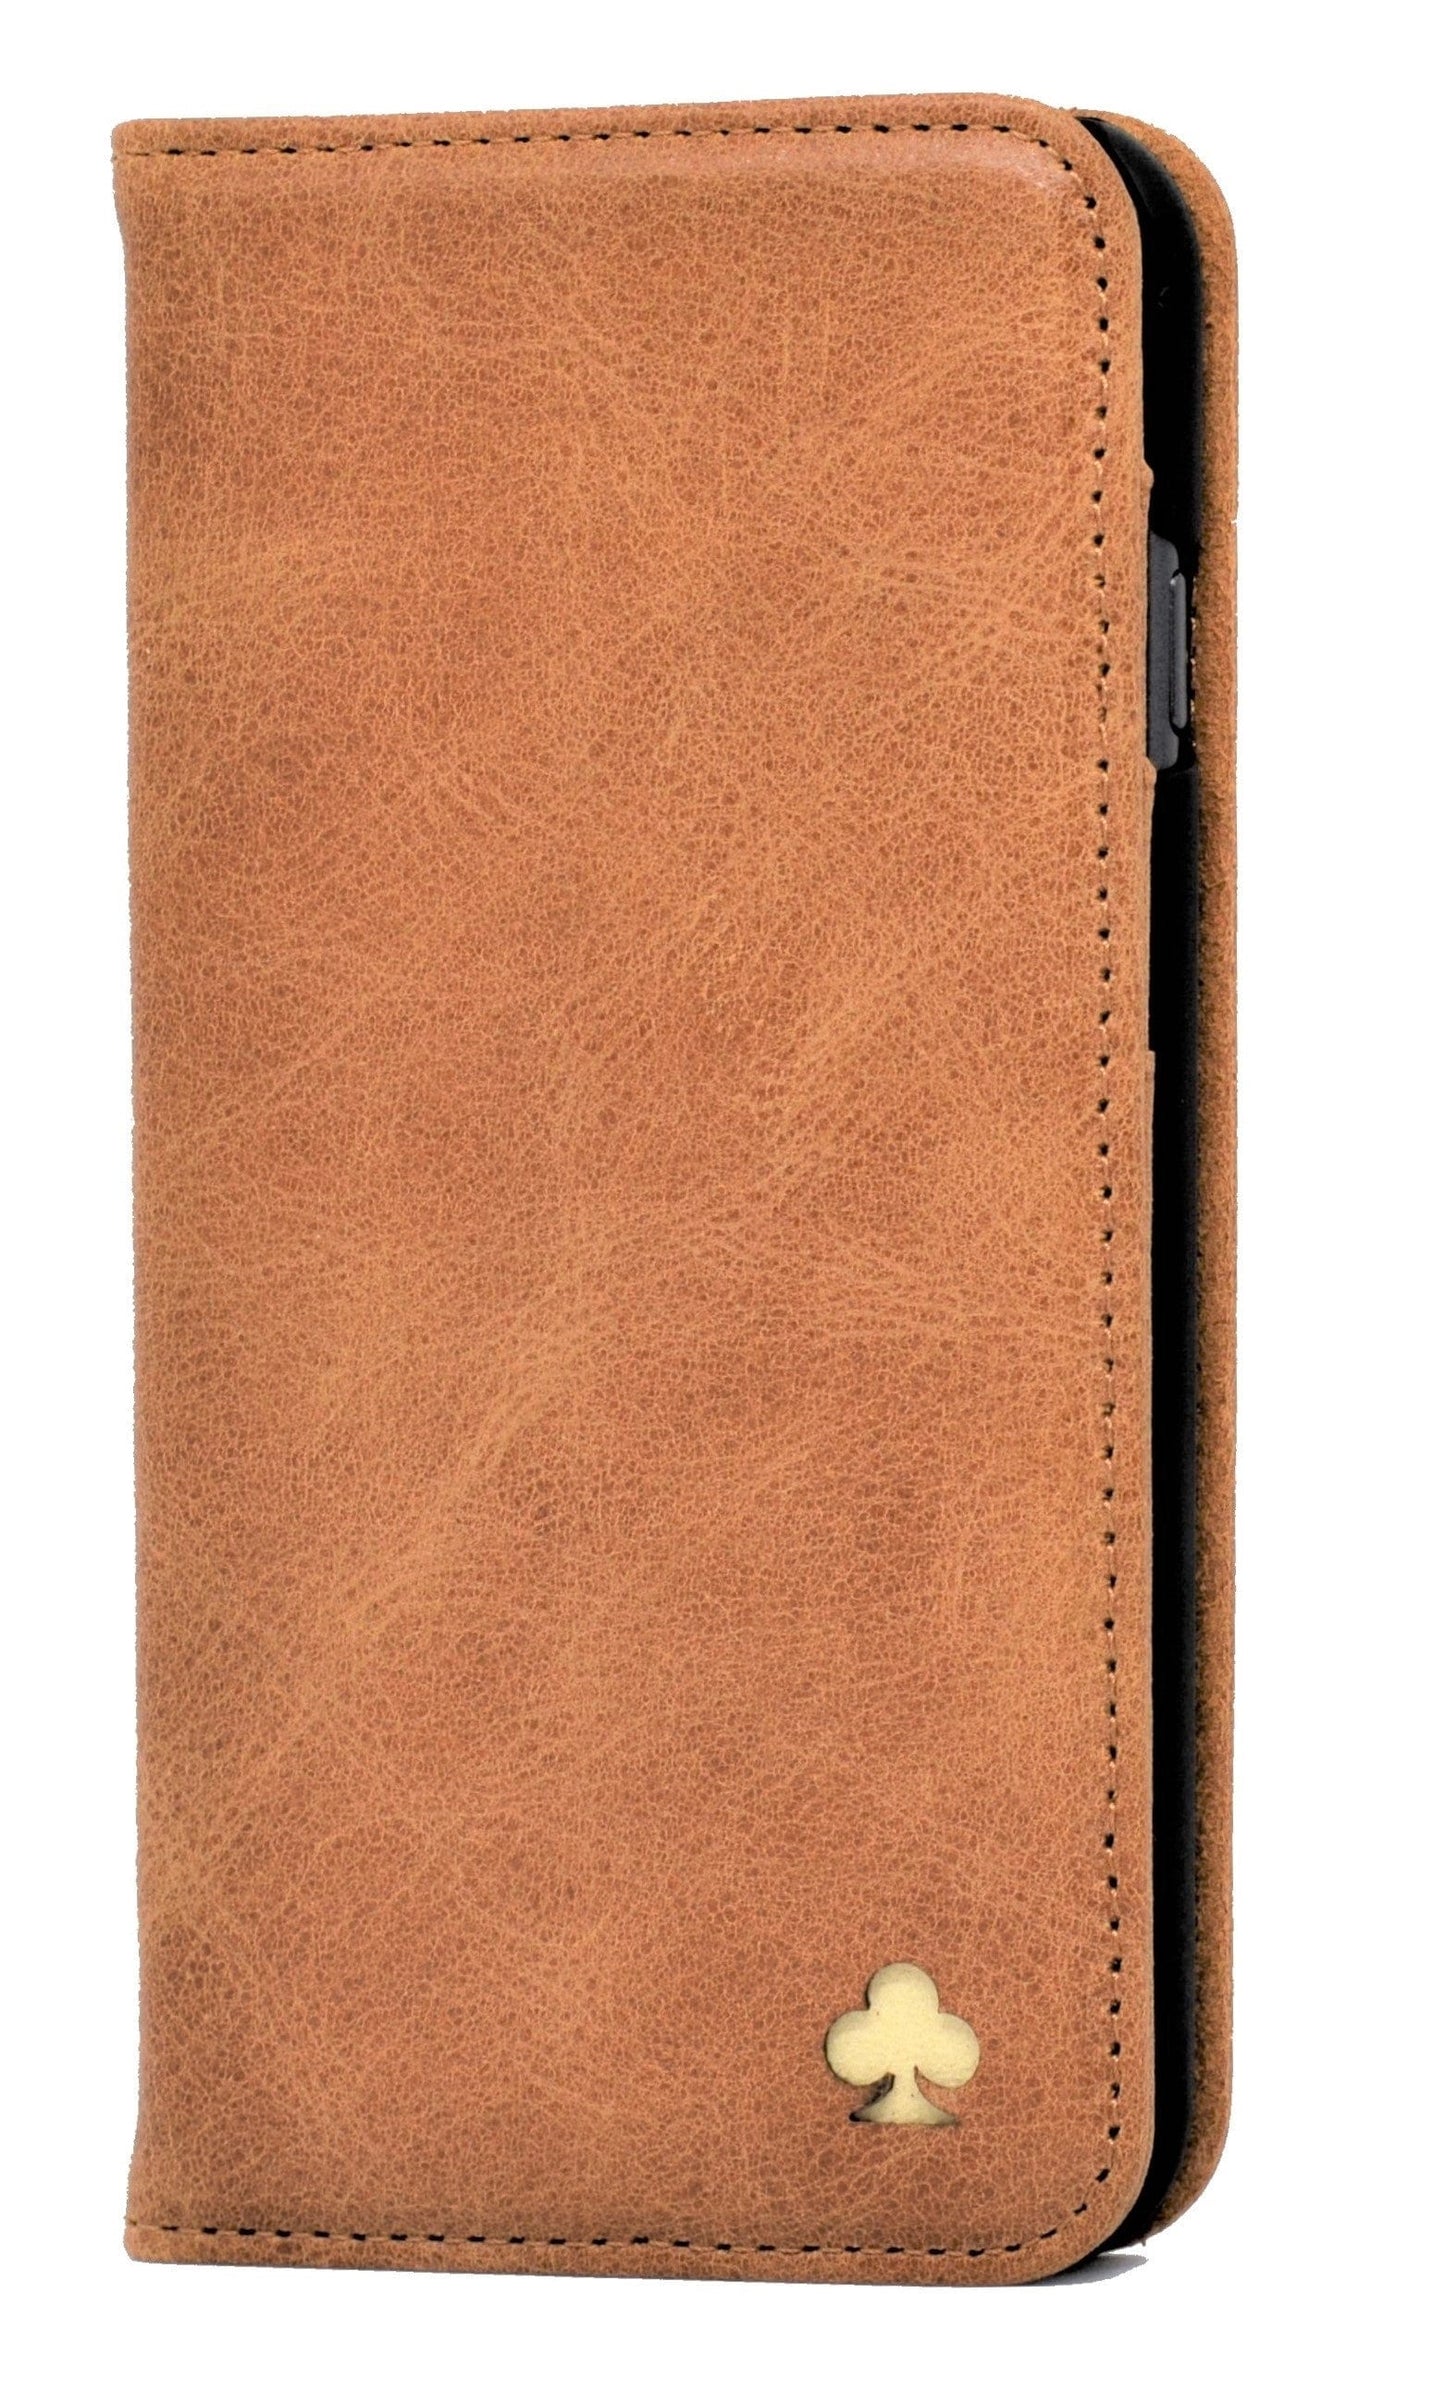 Samsung Galaxy S20 Ultra Leather Case. Premium Slim Genuine Leather Stand Case/Cover/Wallet (Tan)